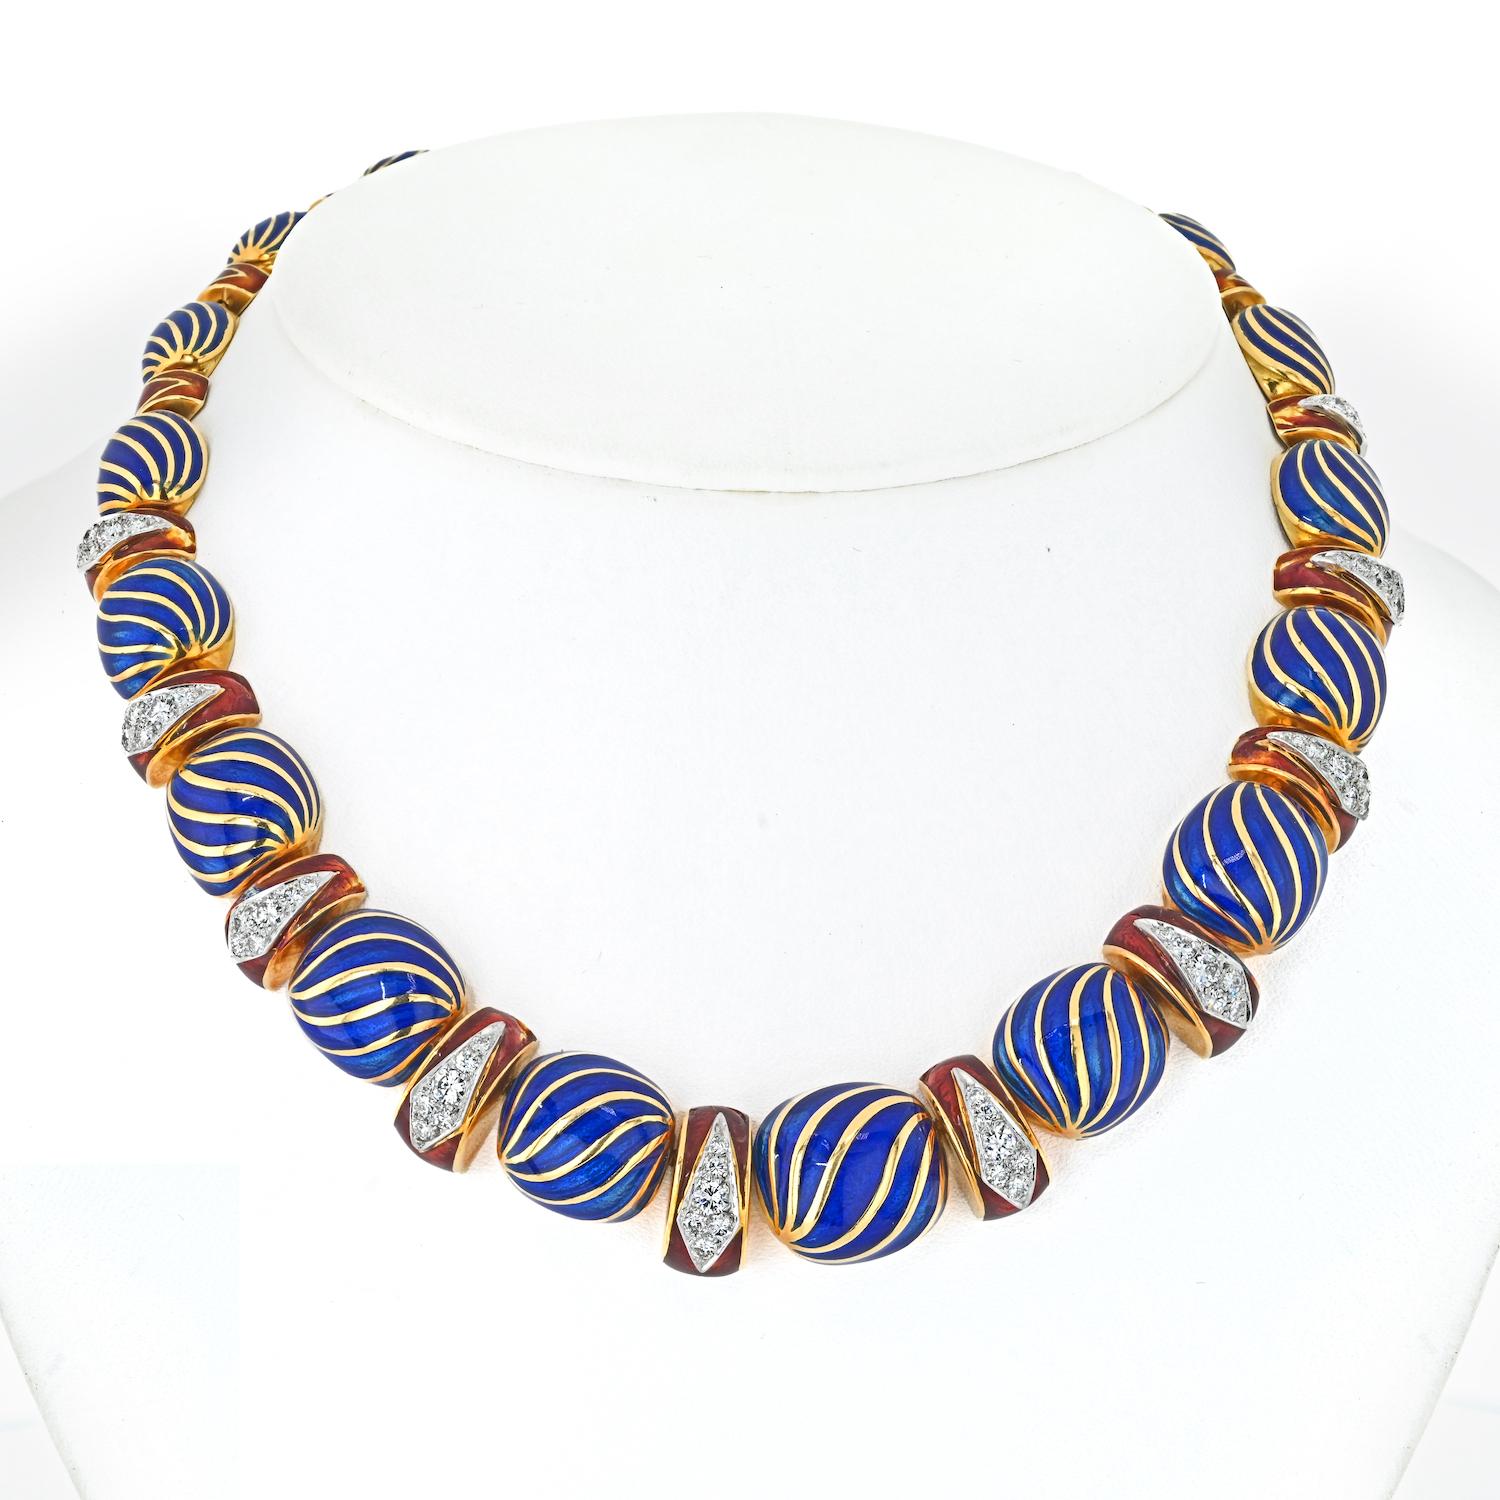 This David Webb 18K Yellow Gold Blue and Red Enamel Diamond Necklace is a true masterpiece of design and craftsmanship. Its exquisite beauty and attention to detail make it a remarkable addition to any jewelry collection.

With a length of 15